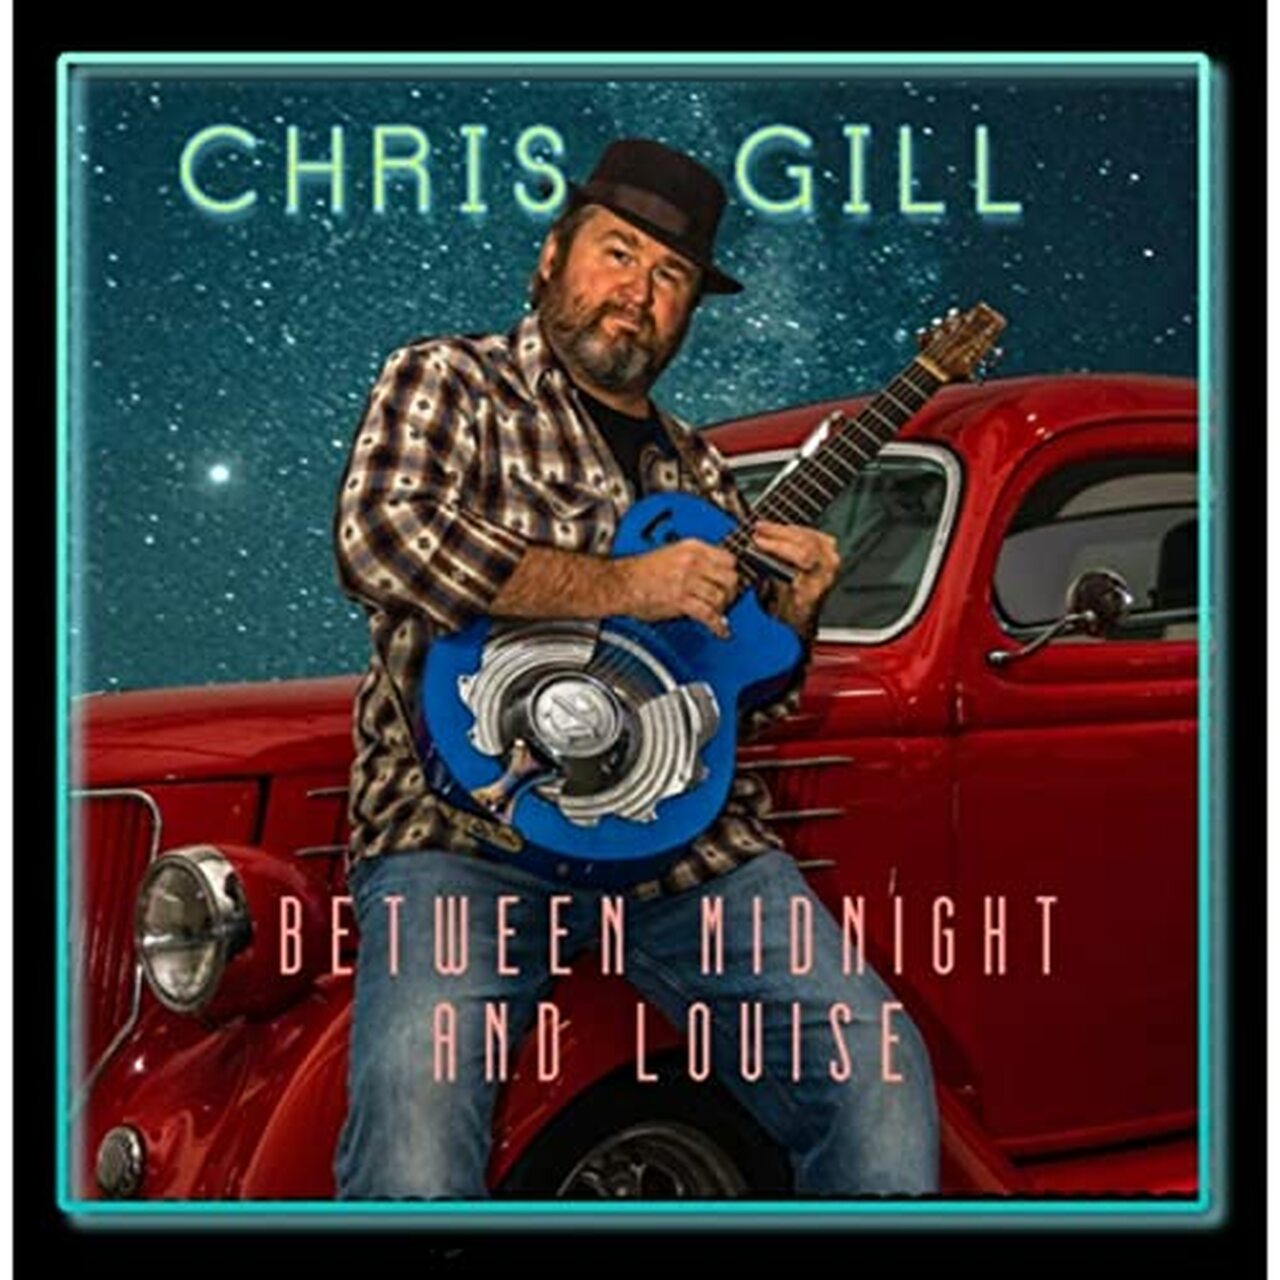 Chris Gill - Between Midnight And Louise